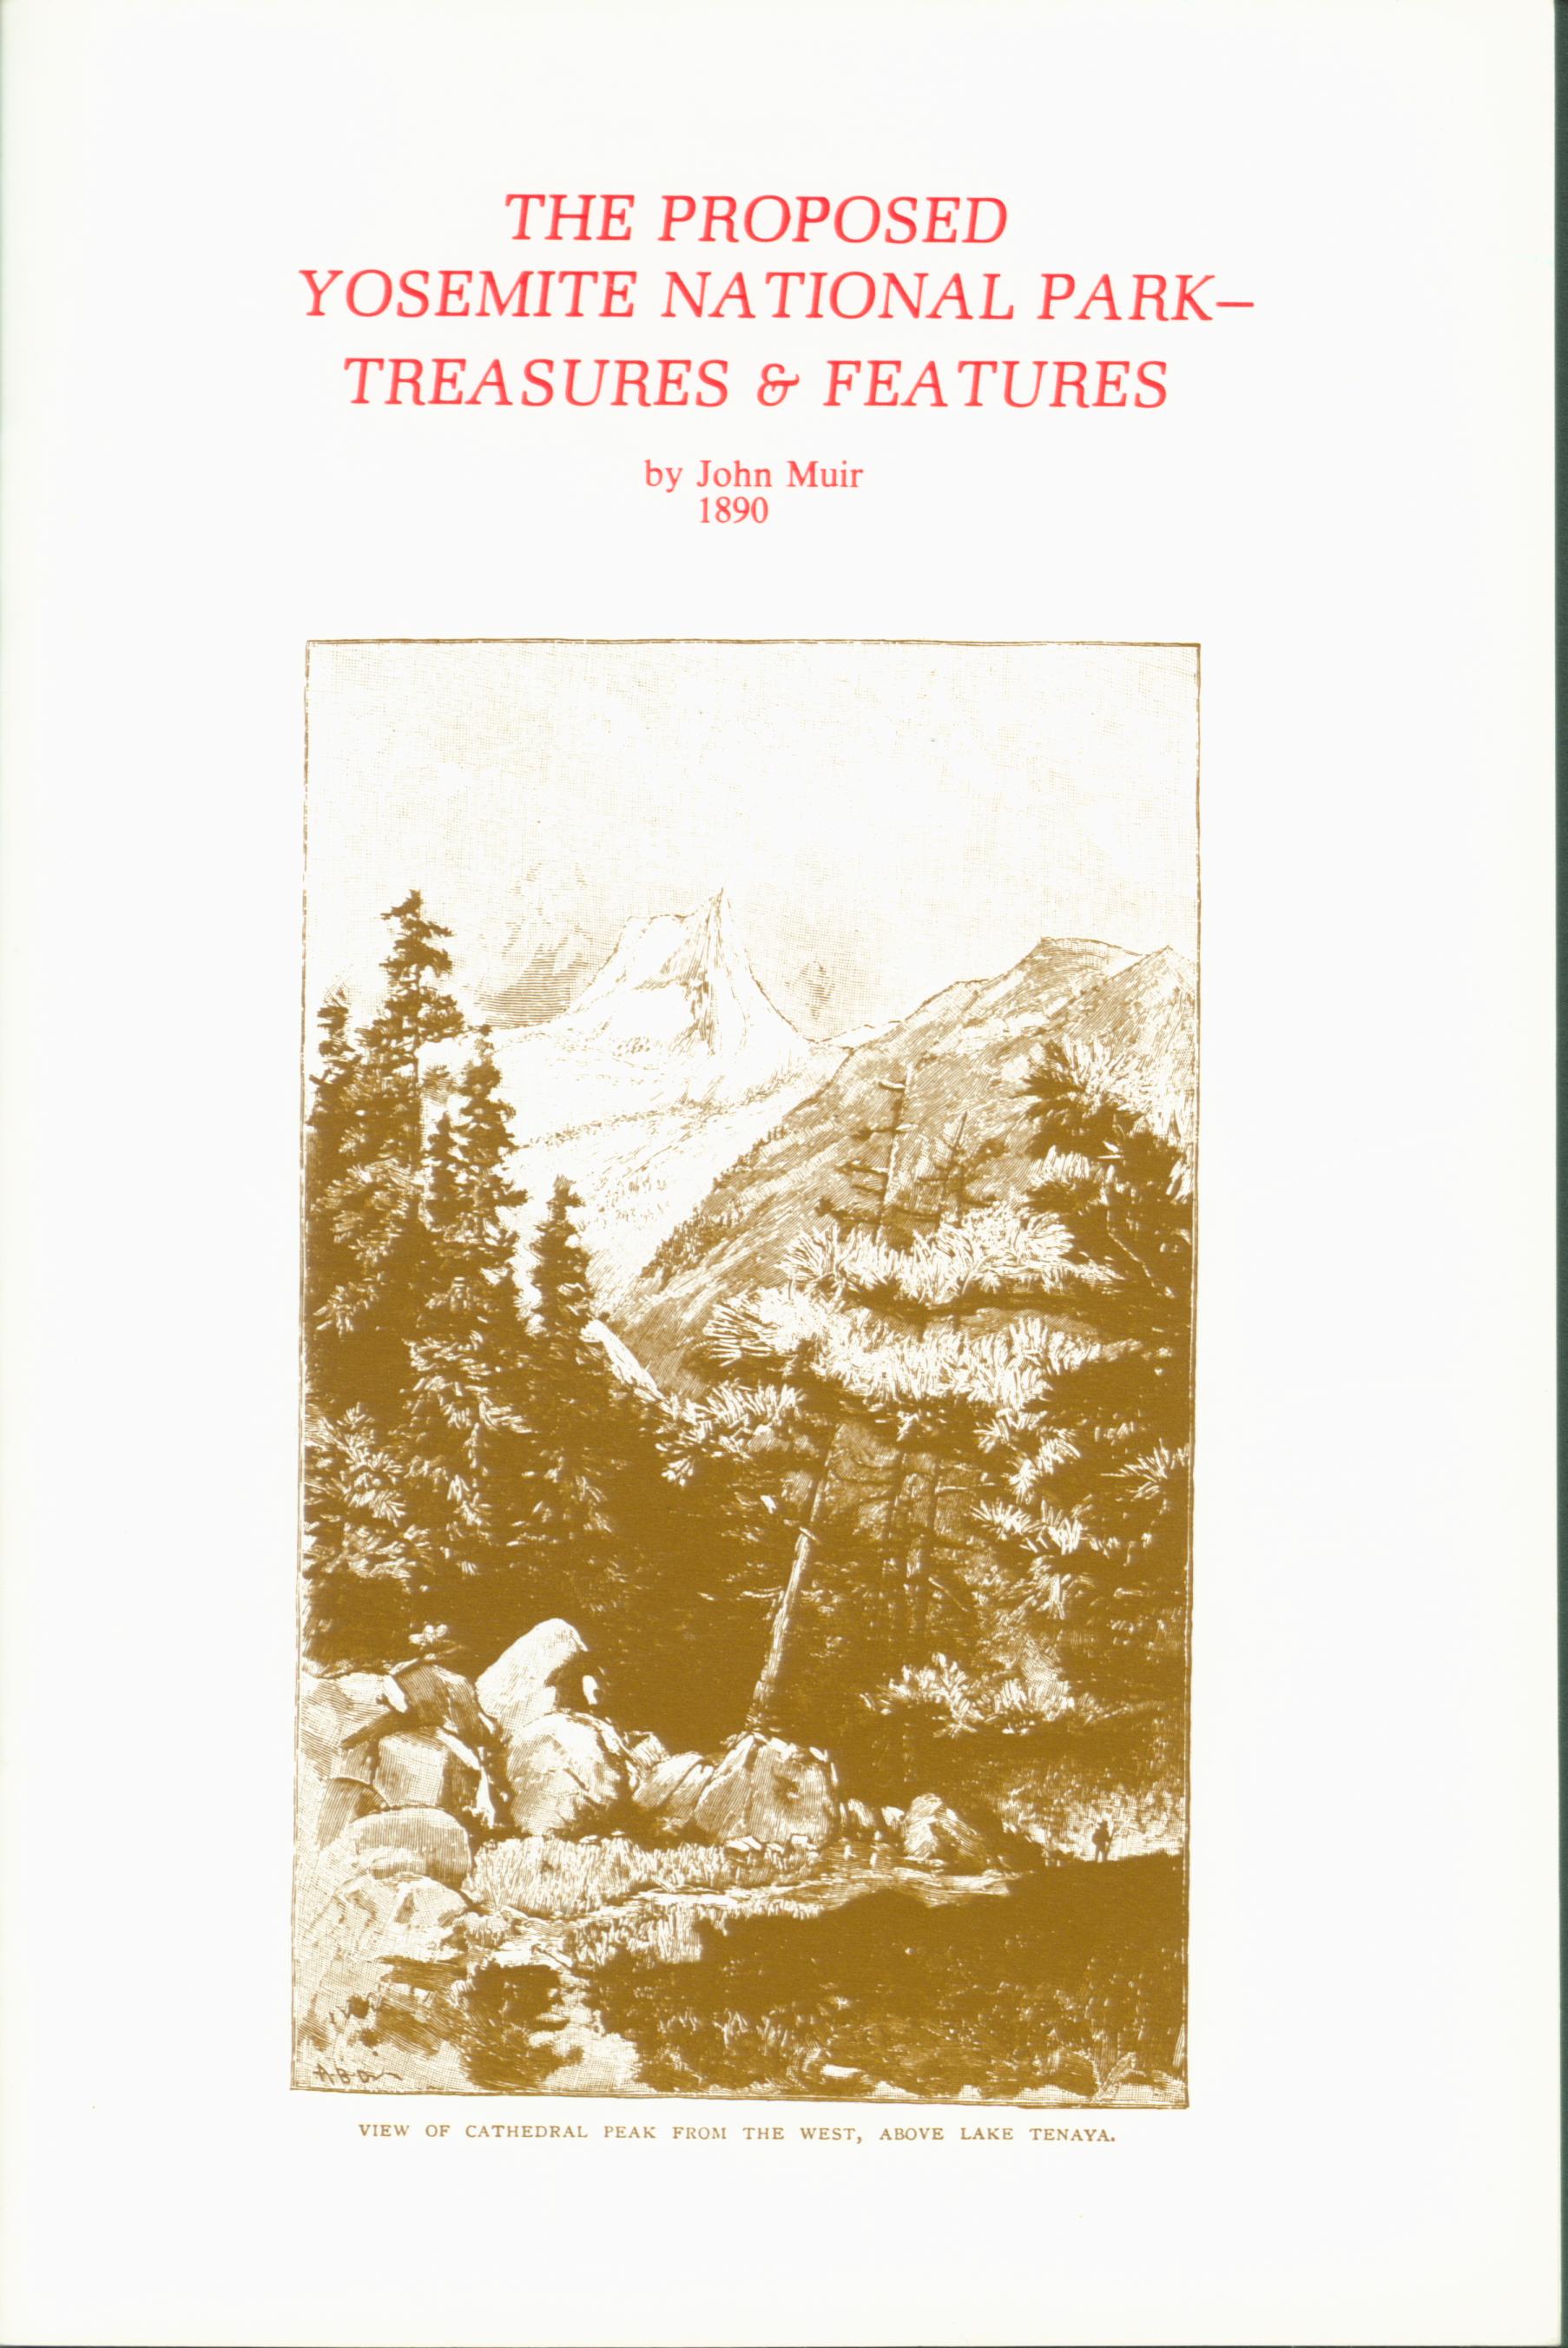 THE PROPOSED YOSEMITE NATIONAL PARK--treasures & features, 1890 (CA).